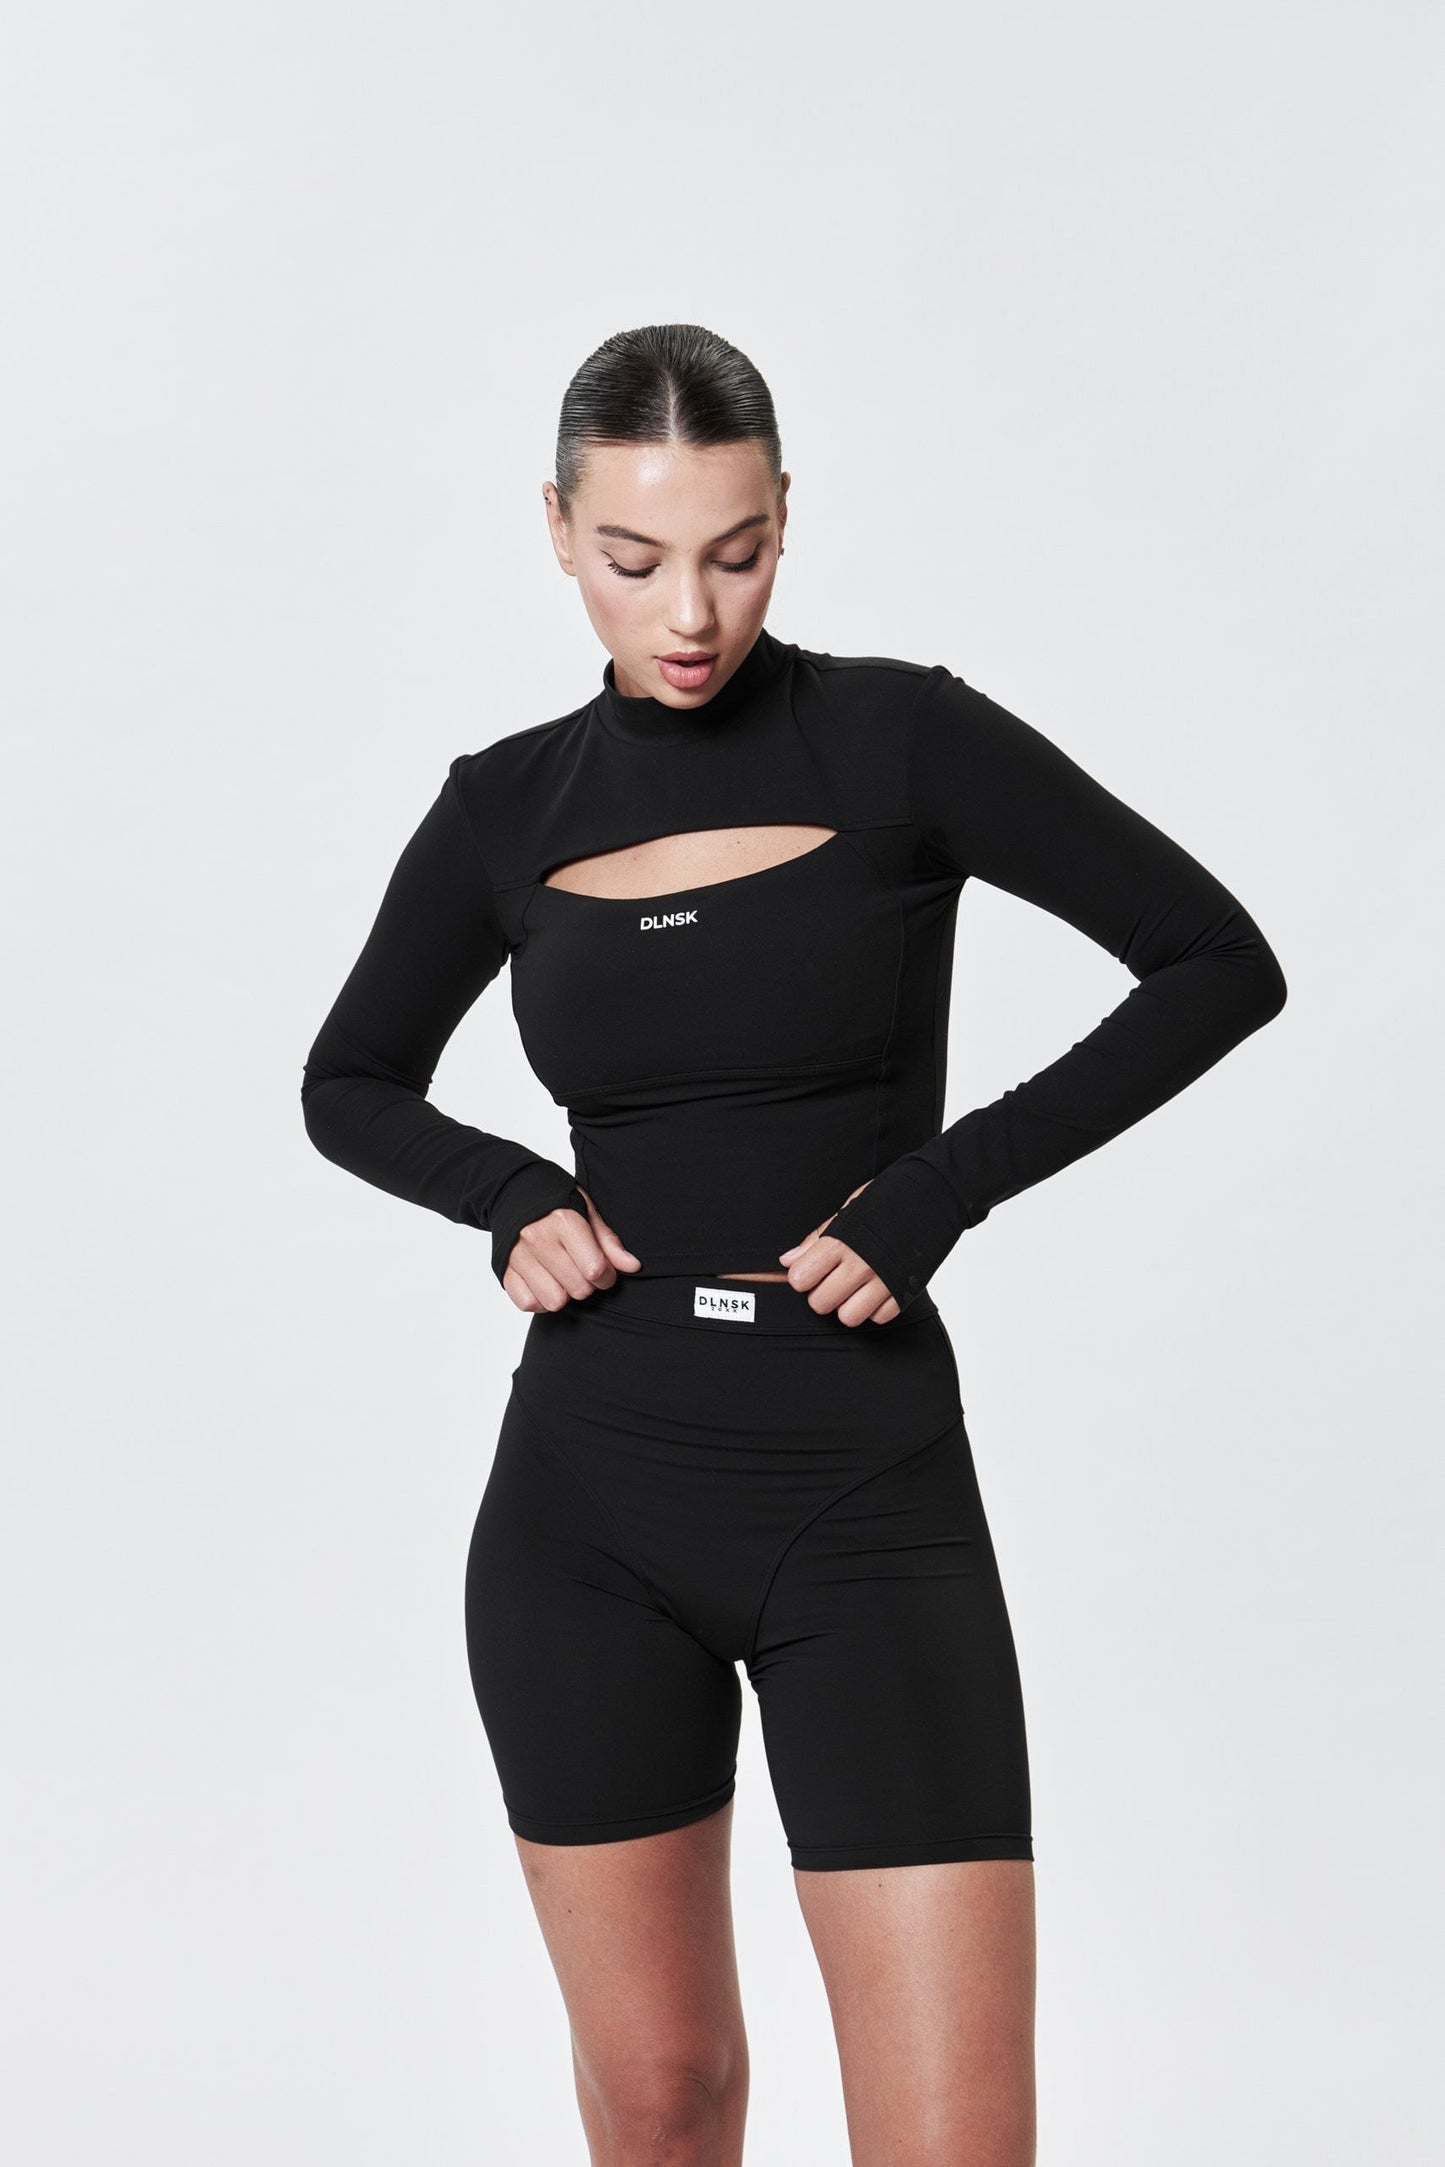 SHAPING crop top 2.0 in BLACK Top DLNSK 